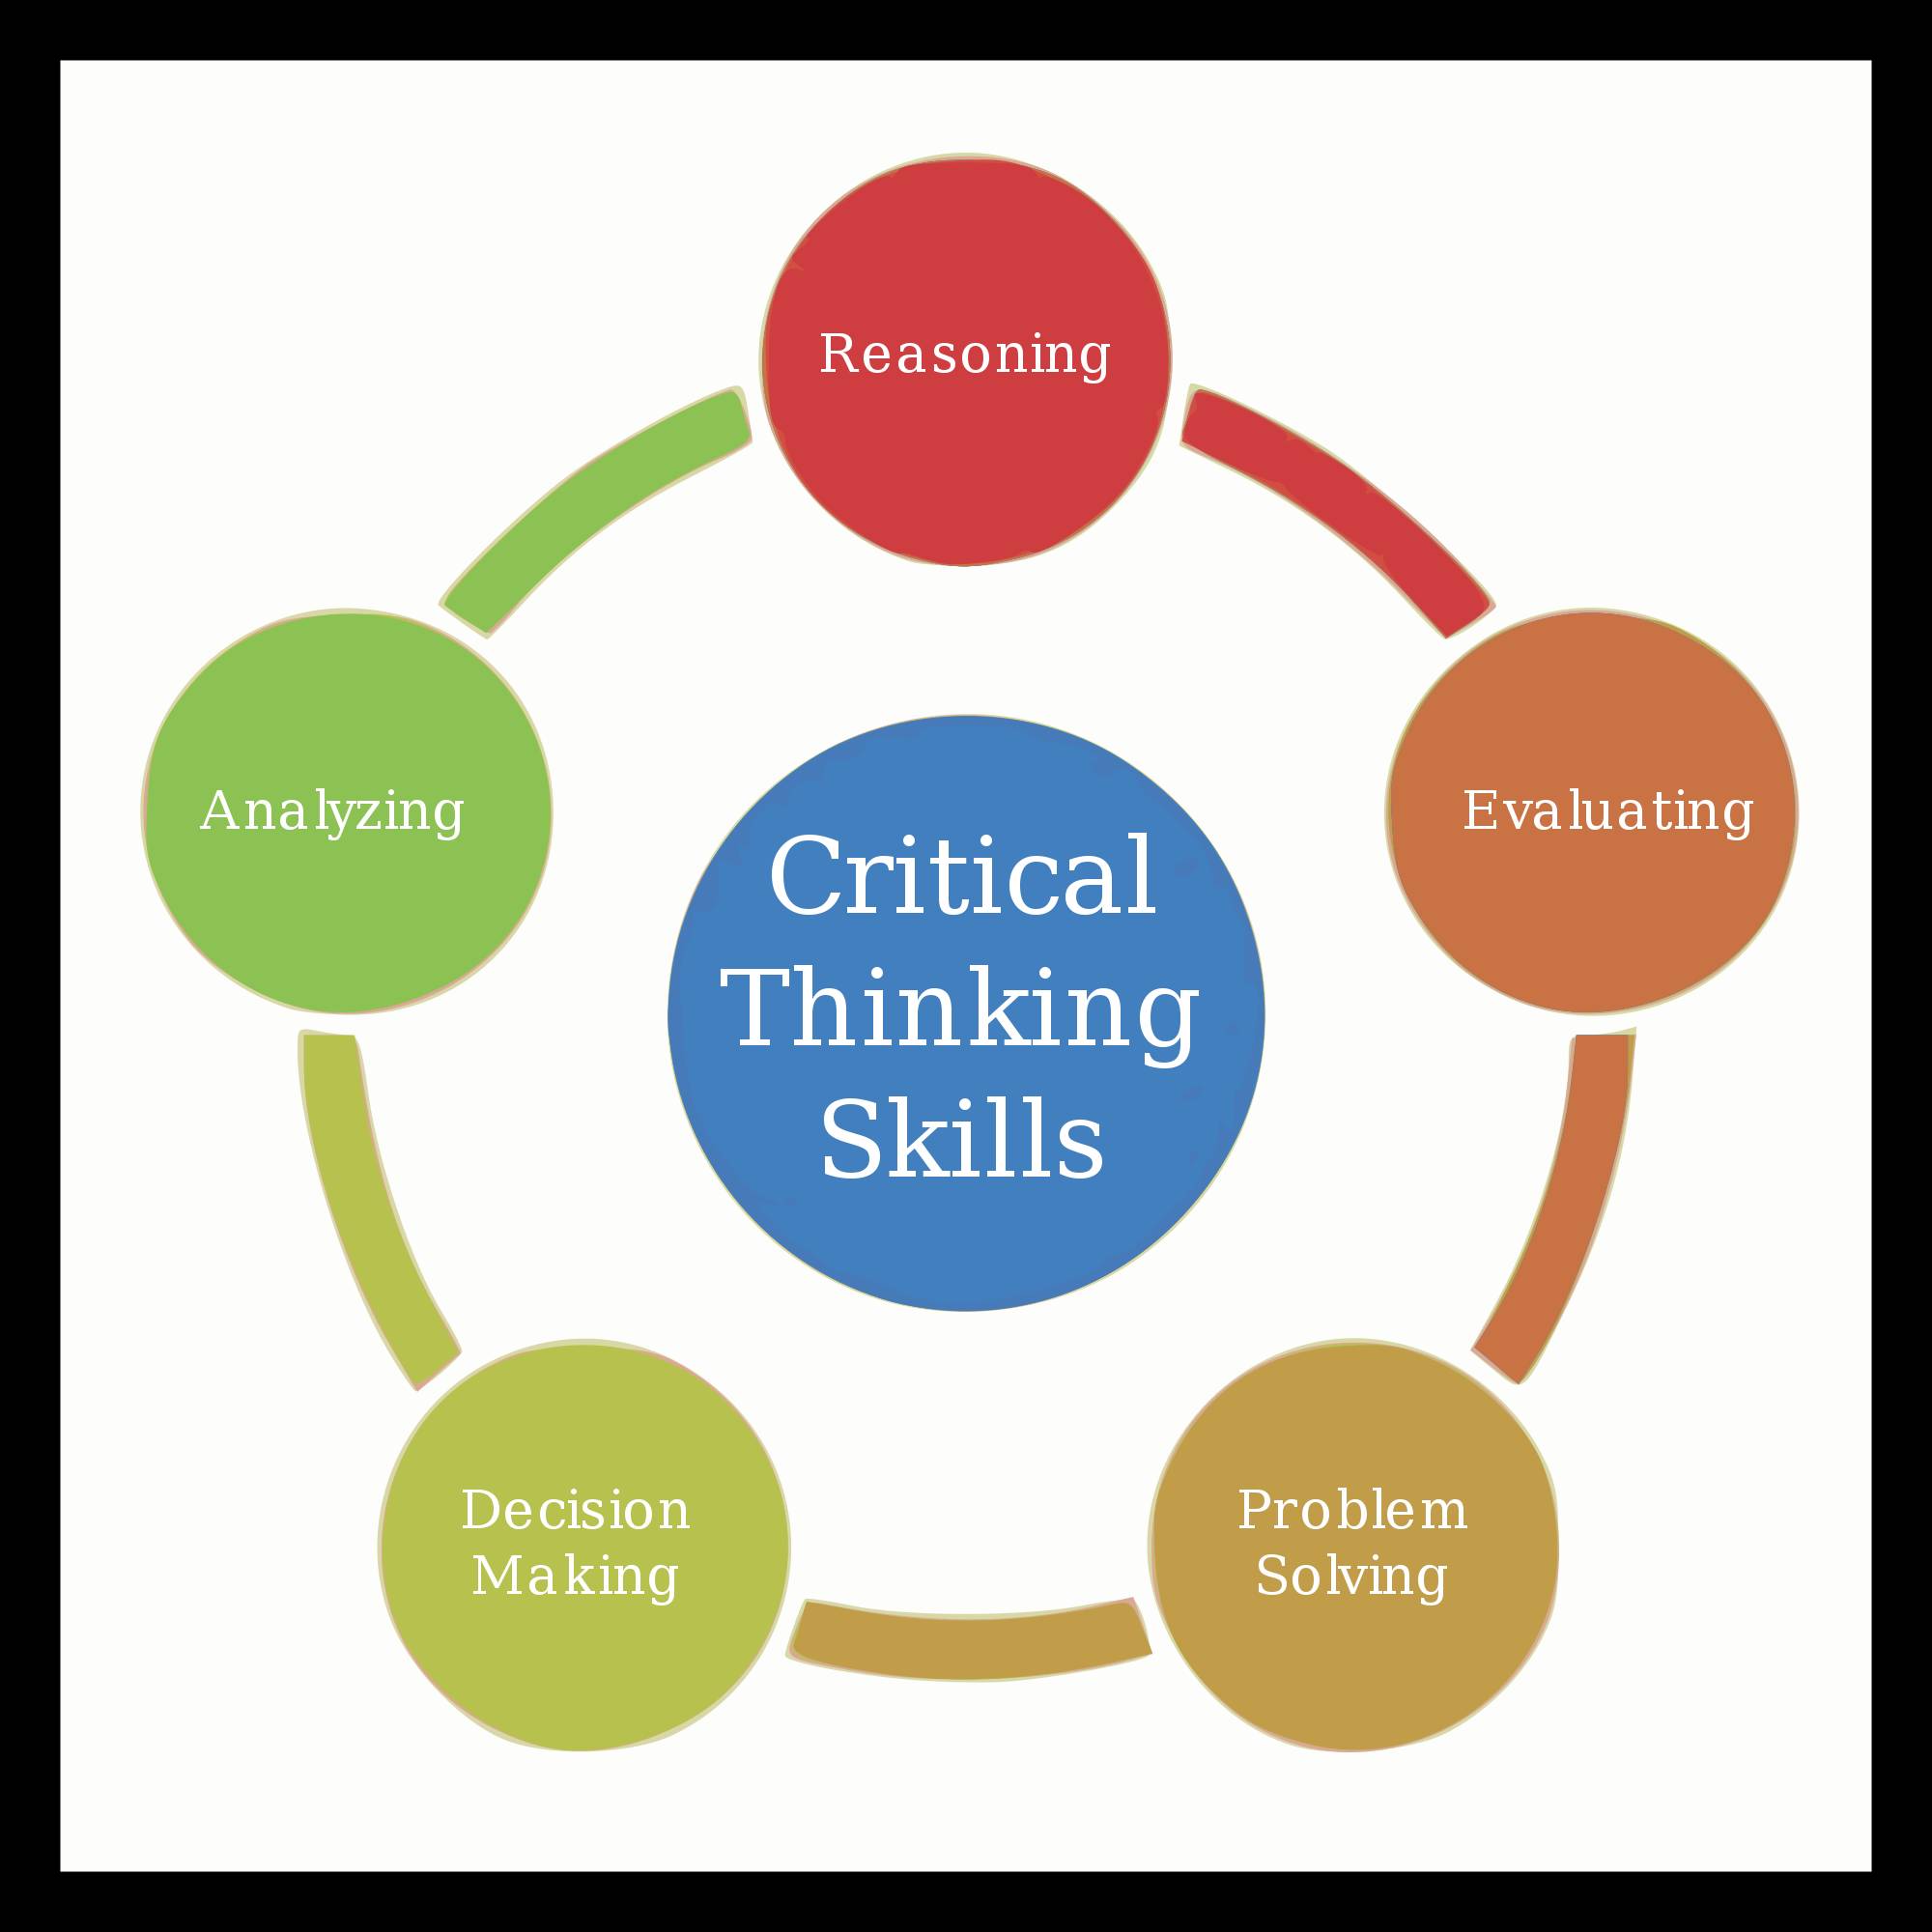 why is critical thinking important in reading and writing